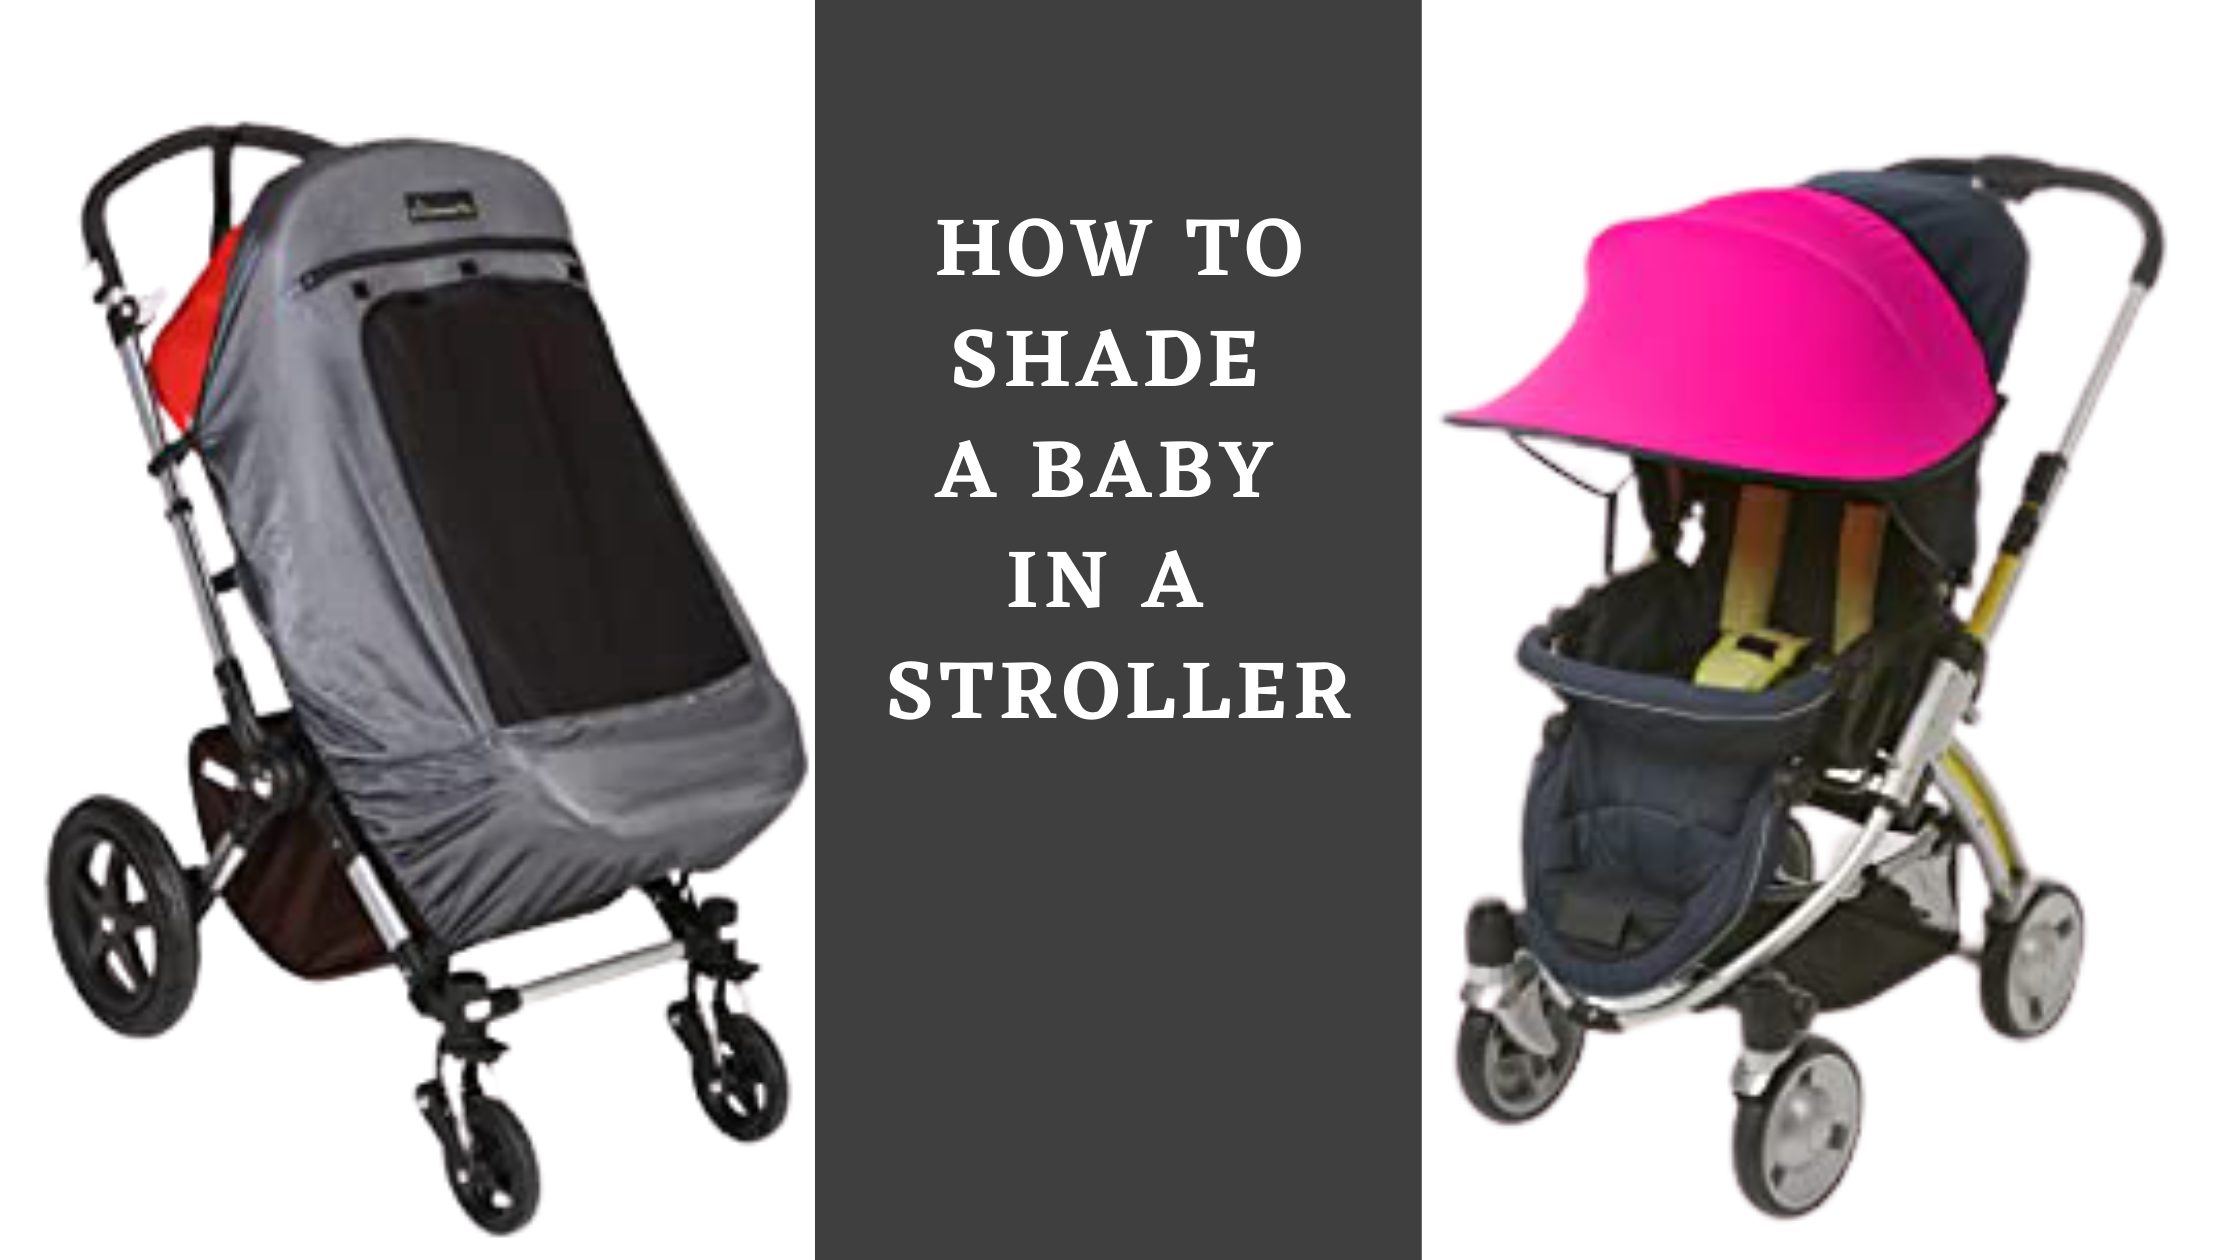 How to Shade a baby in a stroller